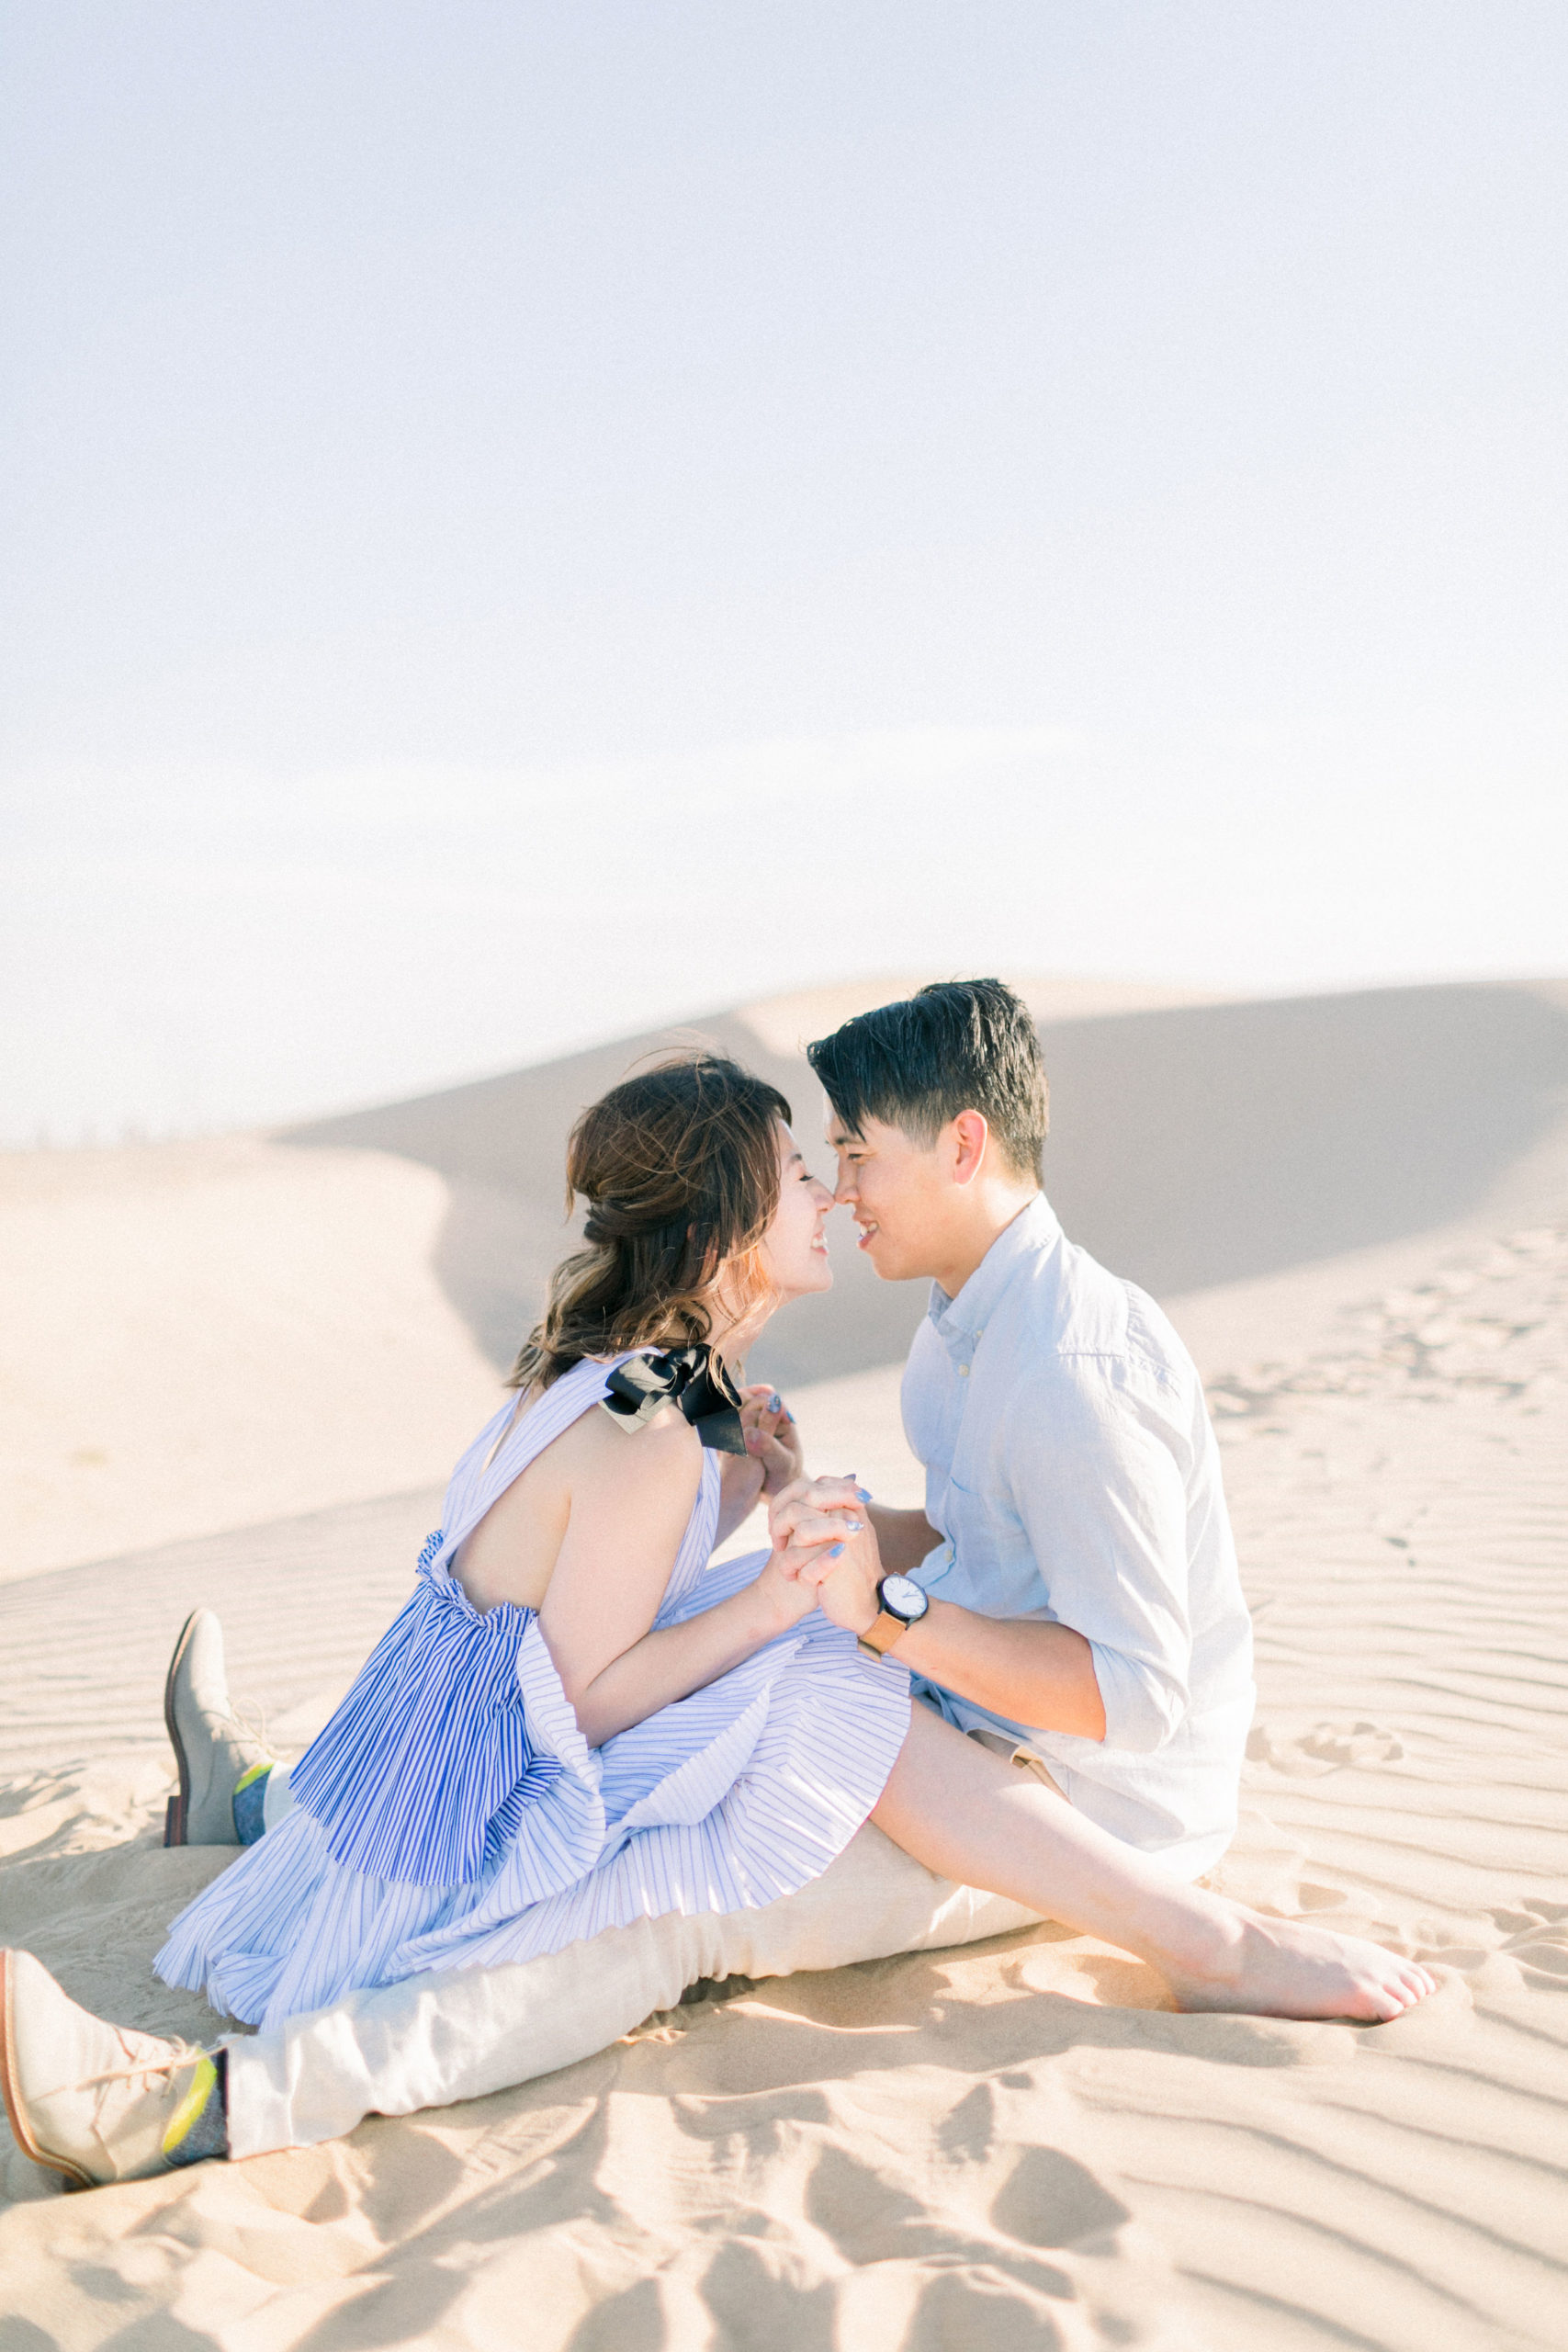 Couple nose to nose in sand dunes